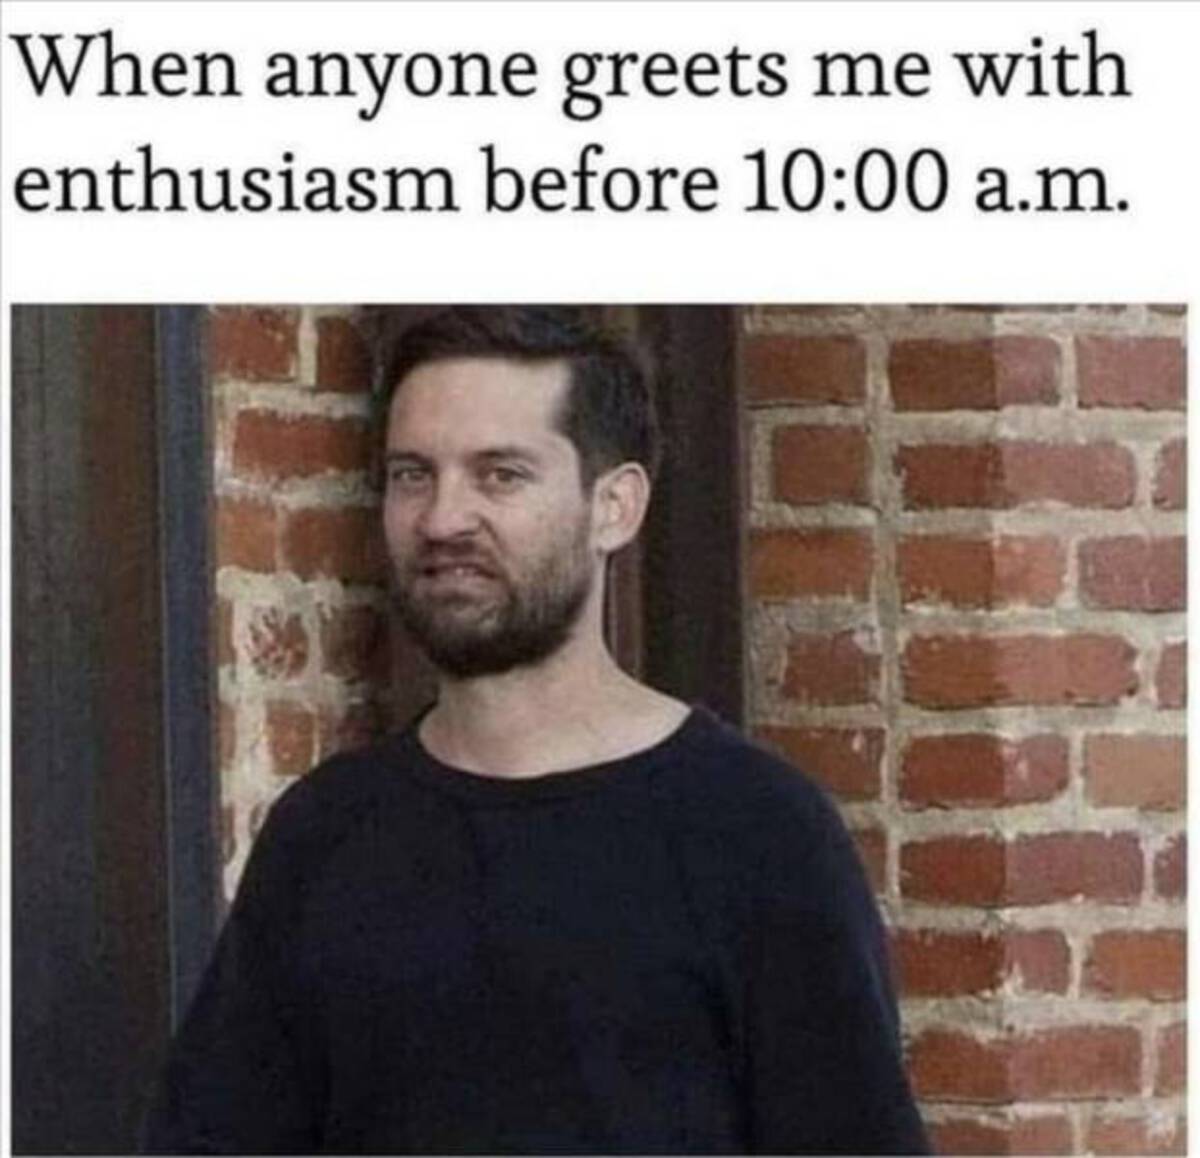 photo caption - When anyone greets me with enthusiasm before a.m.